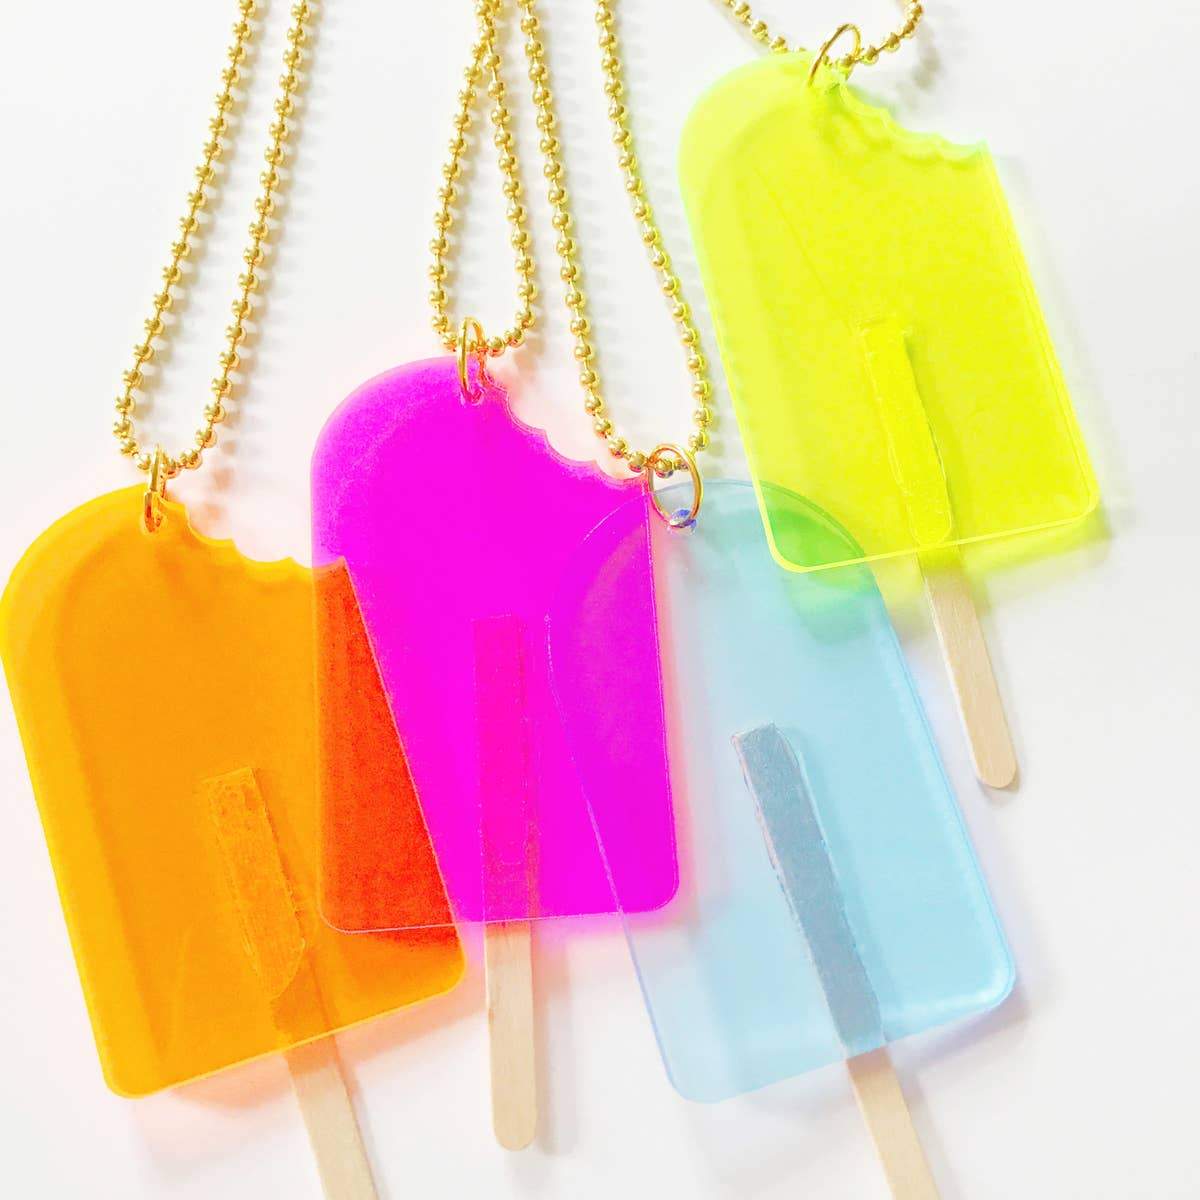 Popsicle Necklaces - Fruit of the Vine